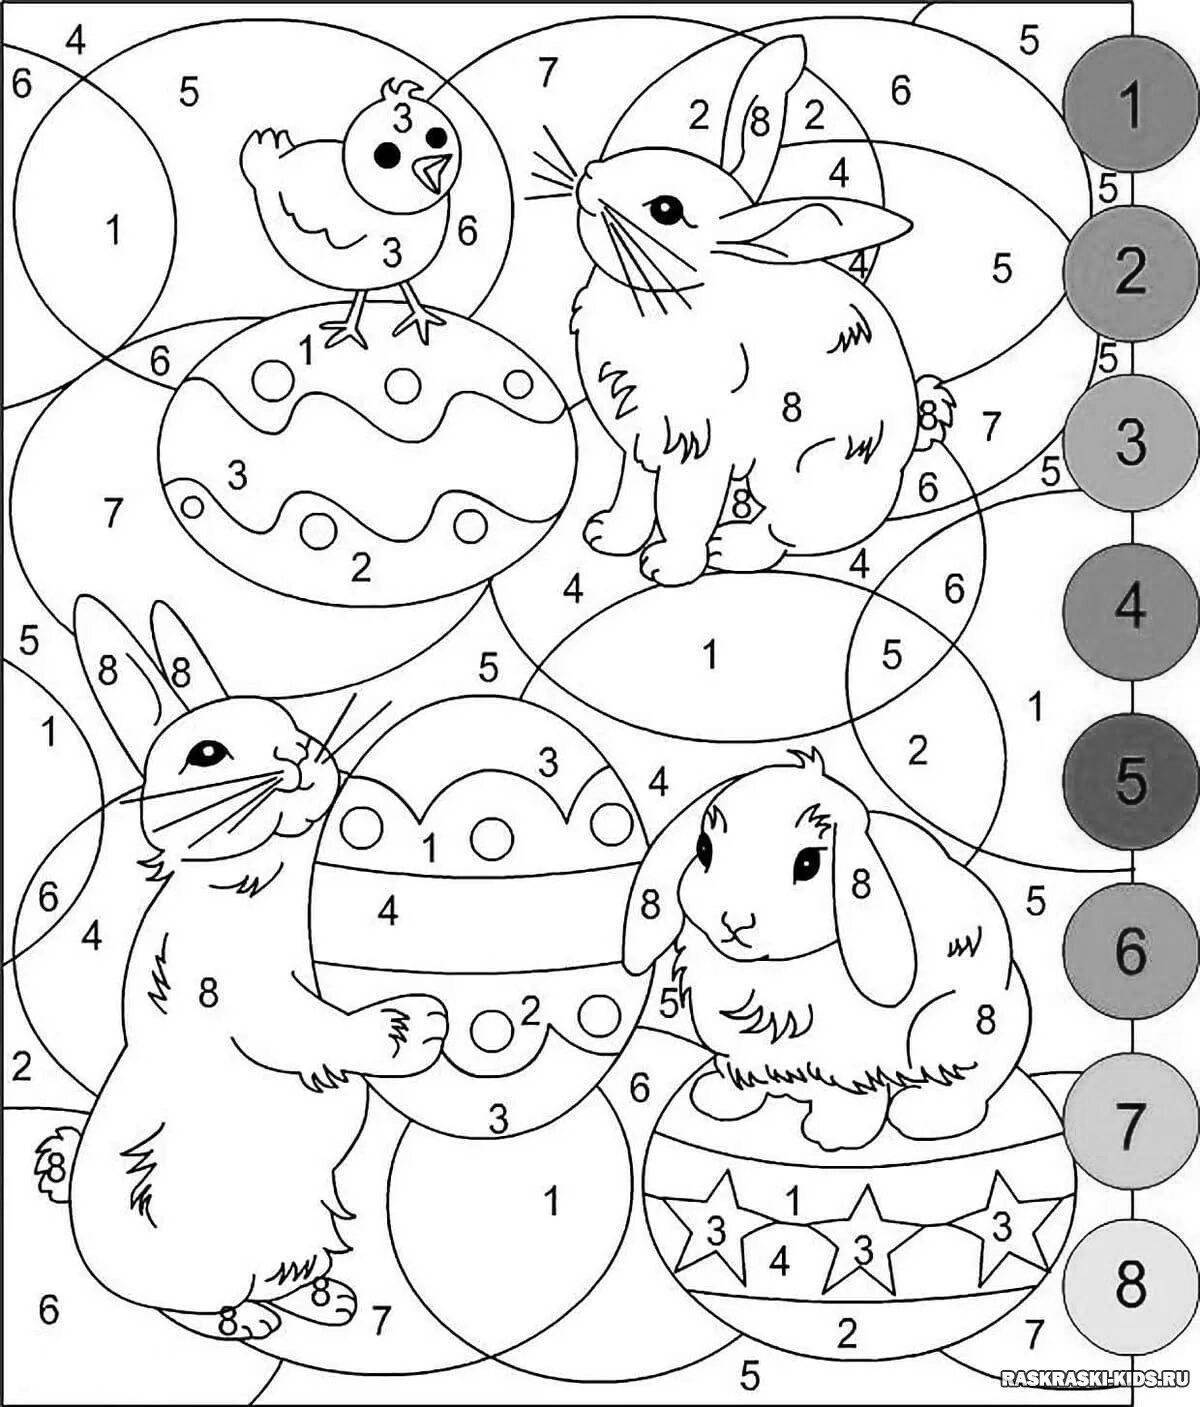 Colorful fun coloring 7 years by numbers